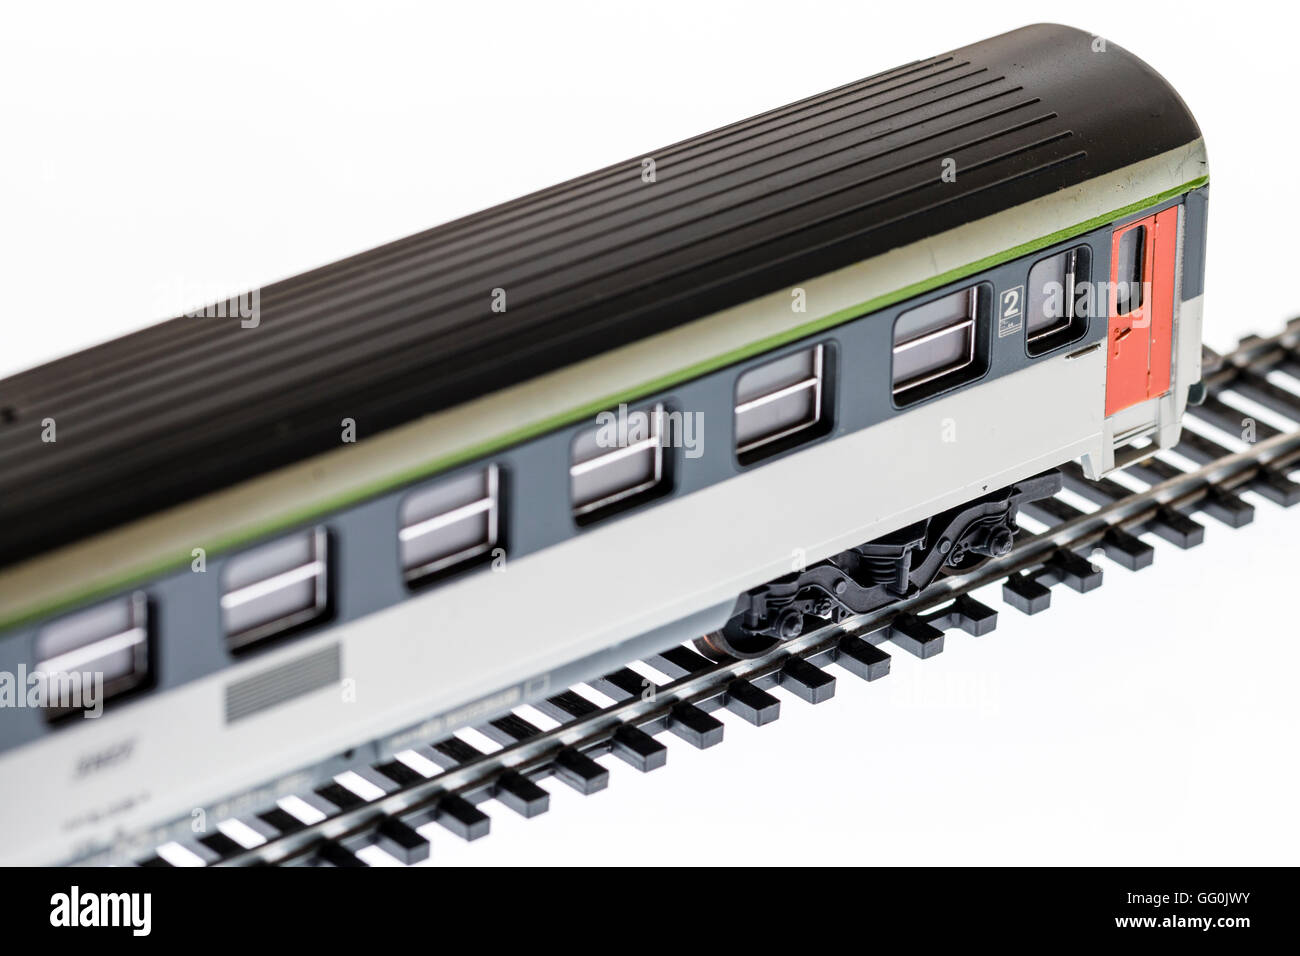 Lima railway HO/OO scale model railway carriage. SNCF, French National  Railways 2nd class coach on railway track against white background Stock  Photo - Alamy